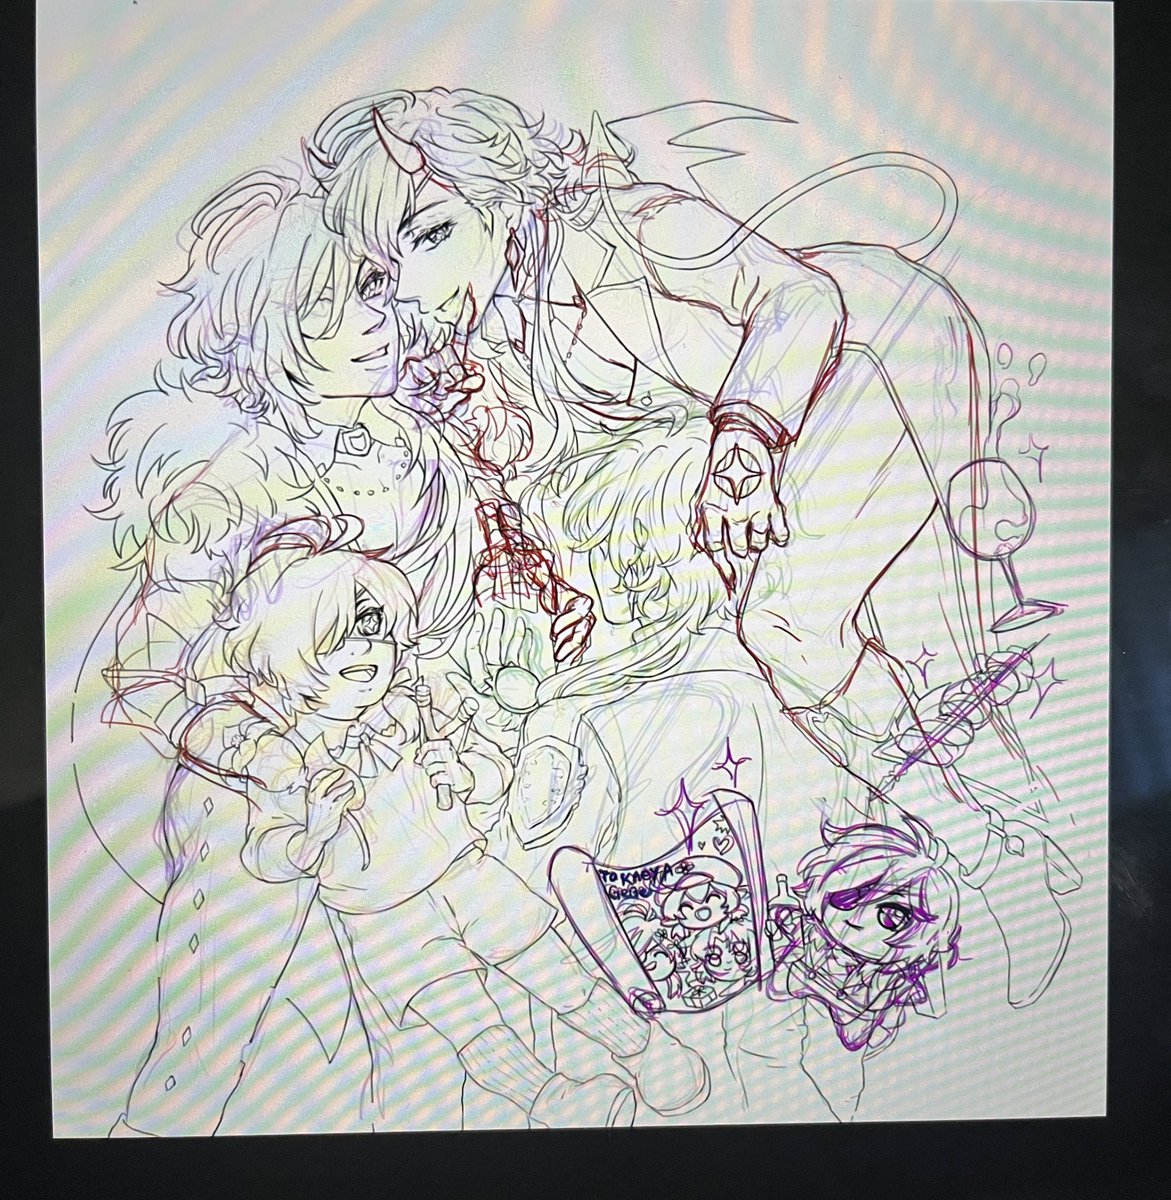 WIPs thought it'd be fun to share 
- demon kae had his pitchfork at first
- then I ended up adding emo kae and the placement of it didn't work out
- usual kae had his hand on kid kaeya's head but in the end I didn't like that placement either 